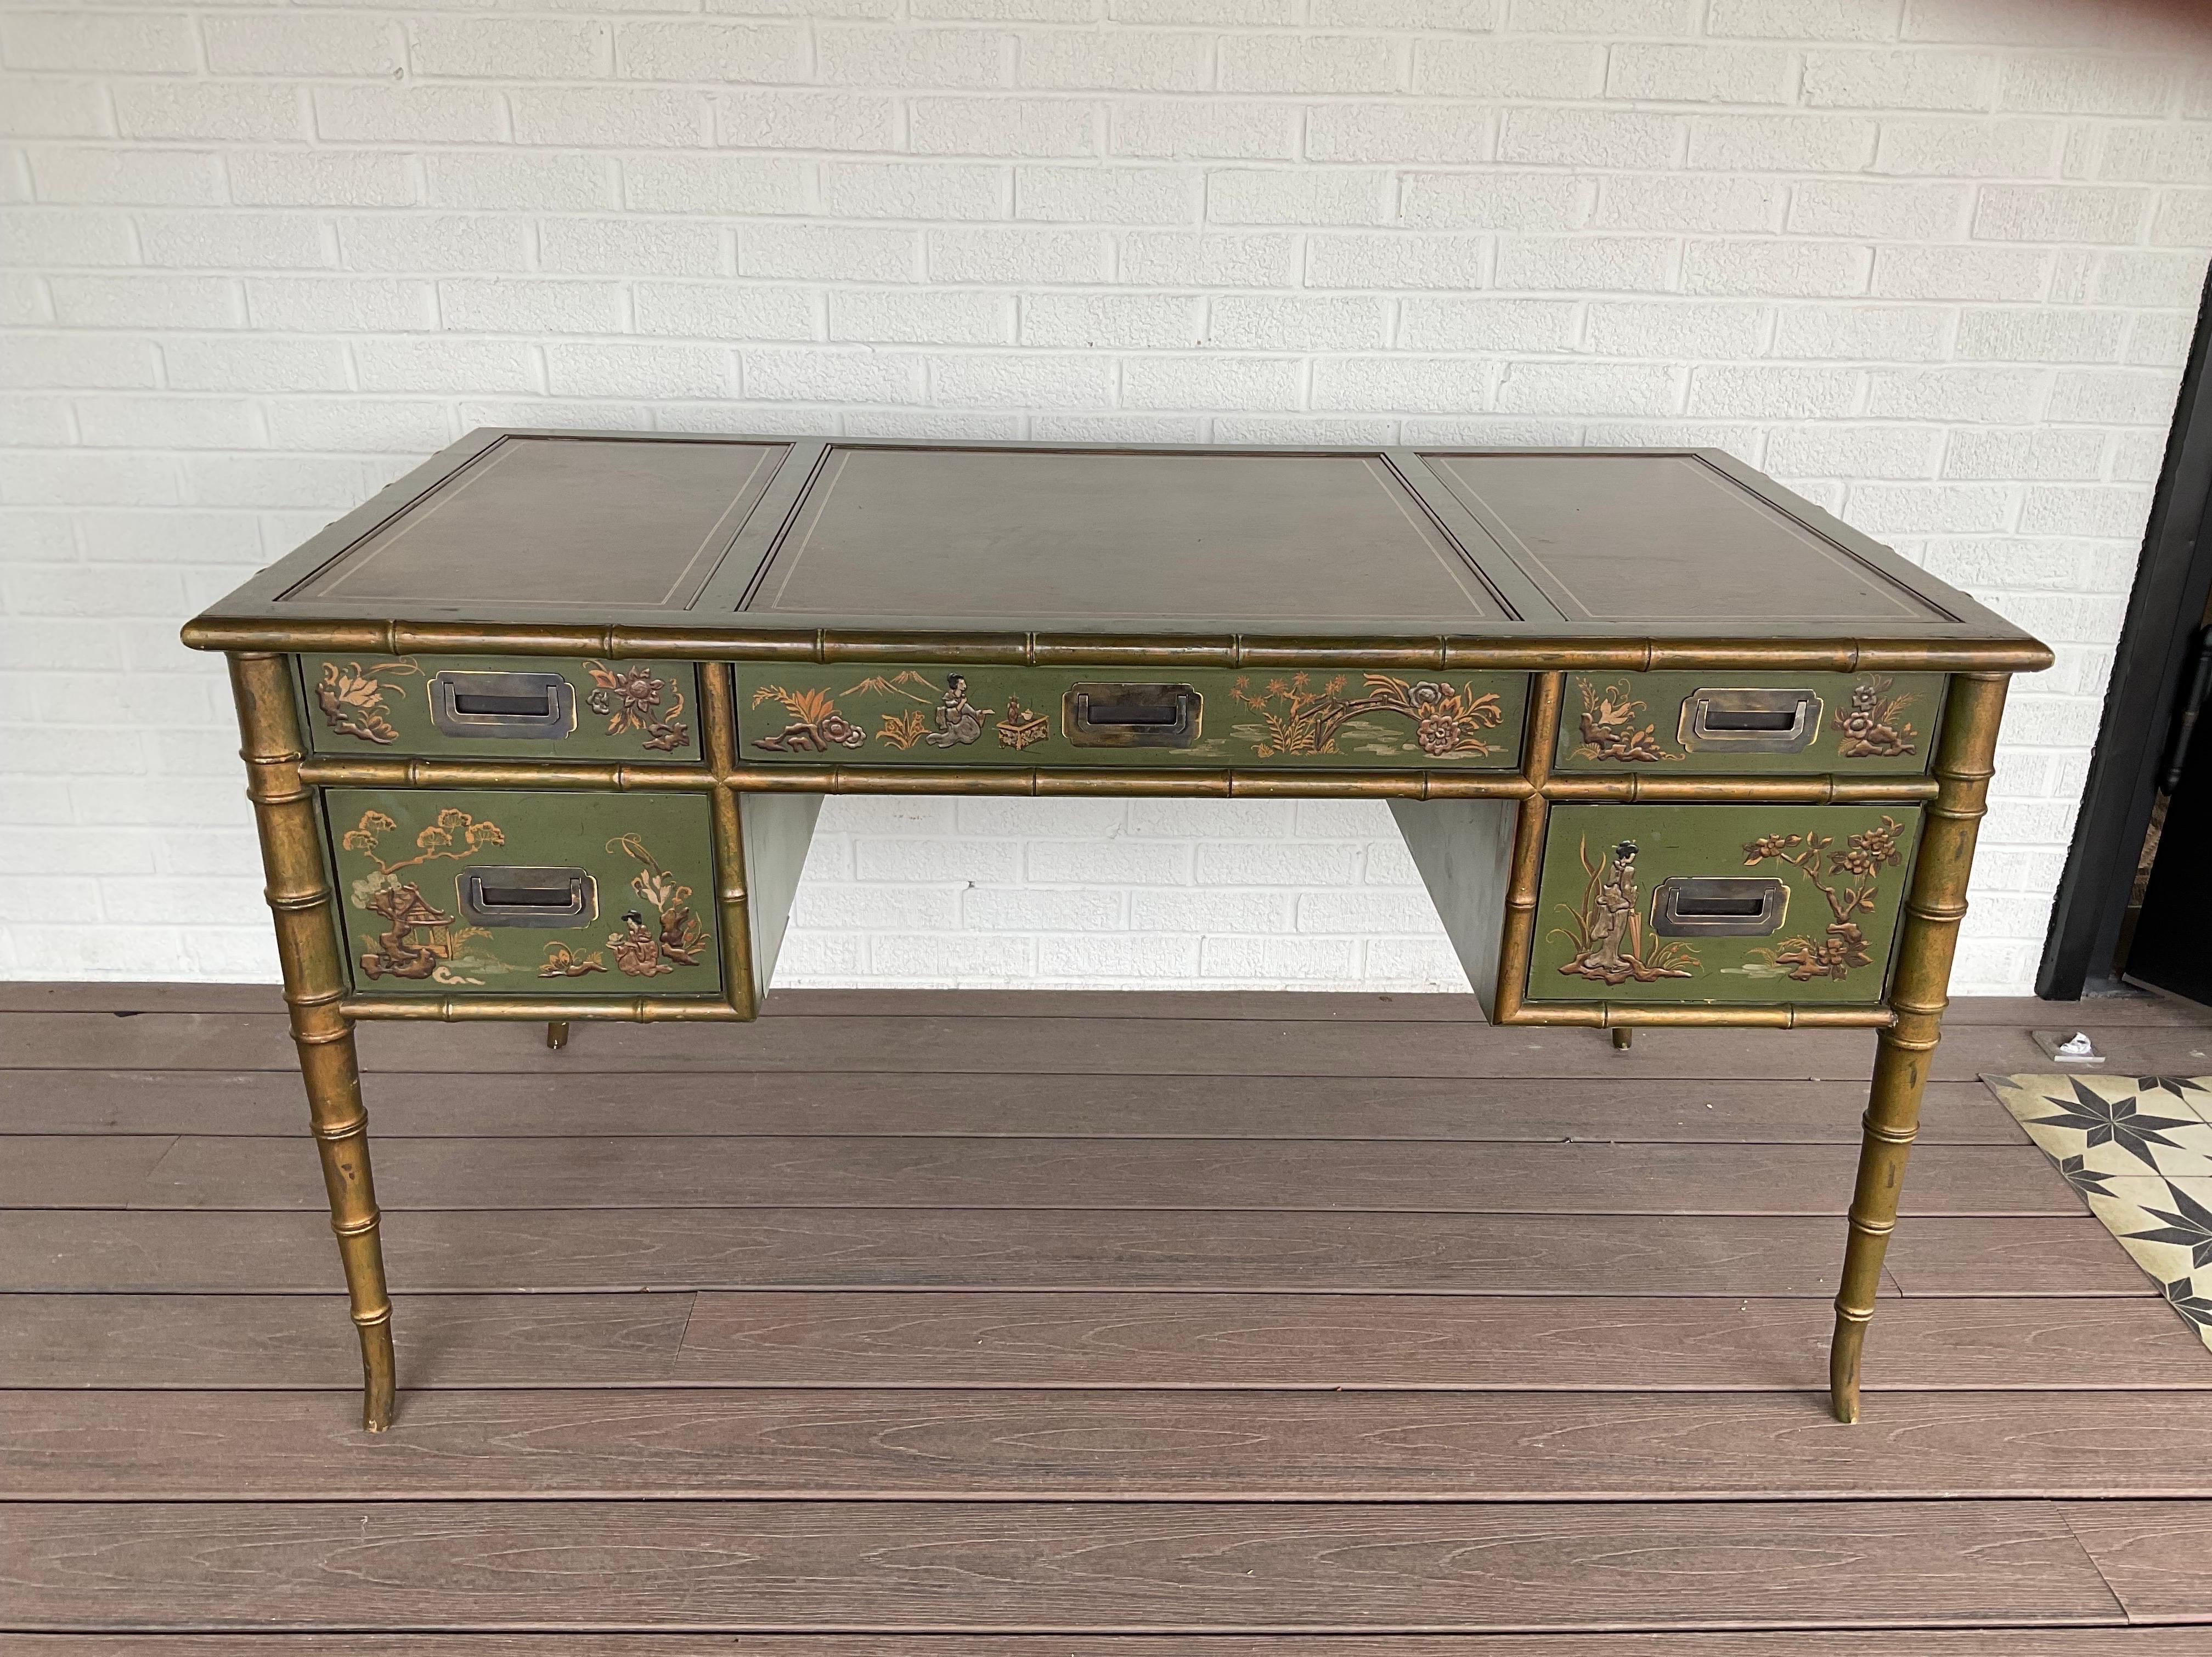 Extraordinary vintage chinoiserie desk from Drexel is extremely rare and fresh from a Palm Beach estate. Gold faux bamboo legs and trim detail surround intricate hand painted scenes from the orient over an intoxicating green lacquered background and